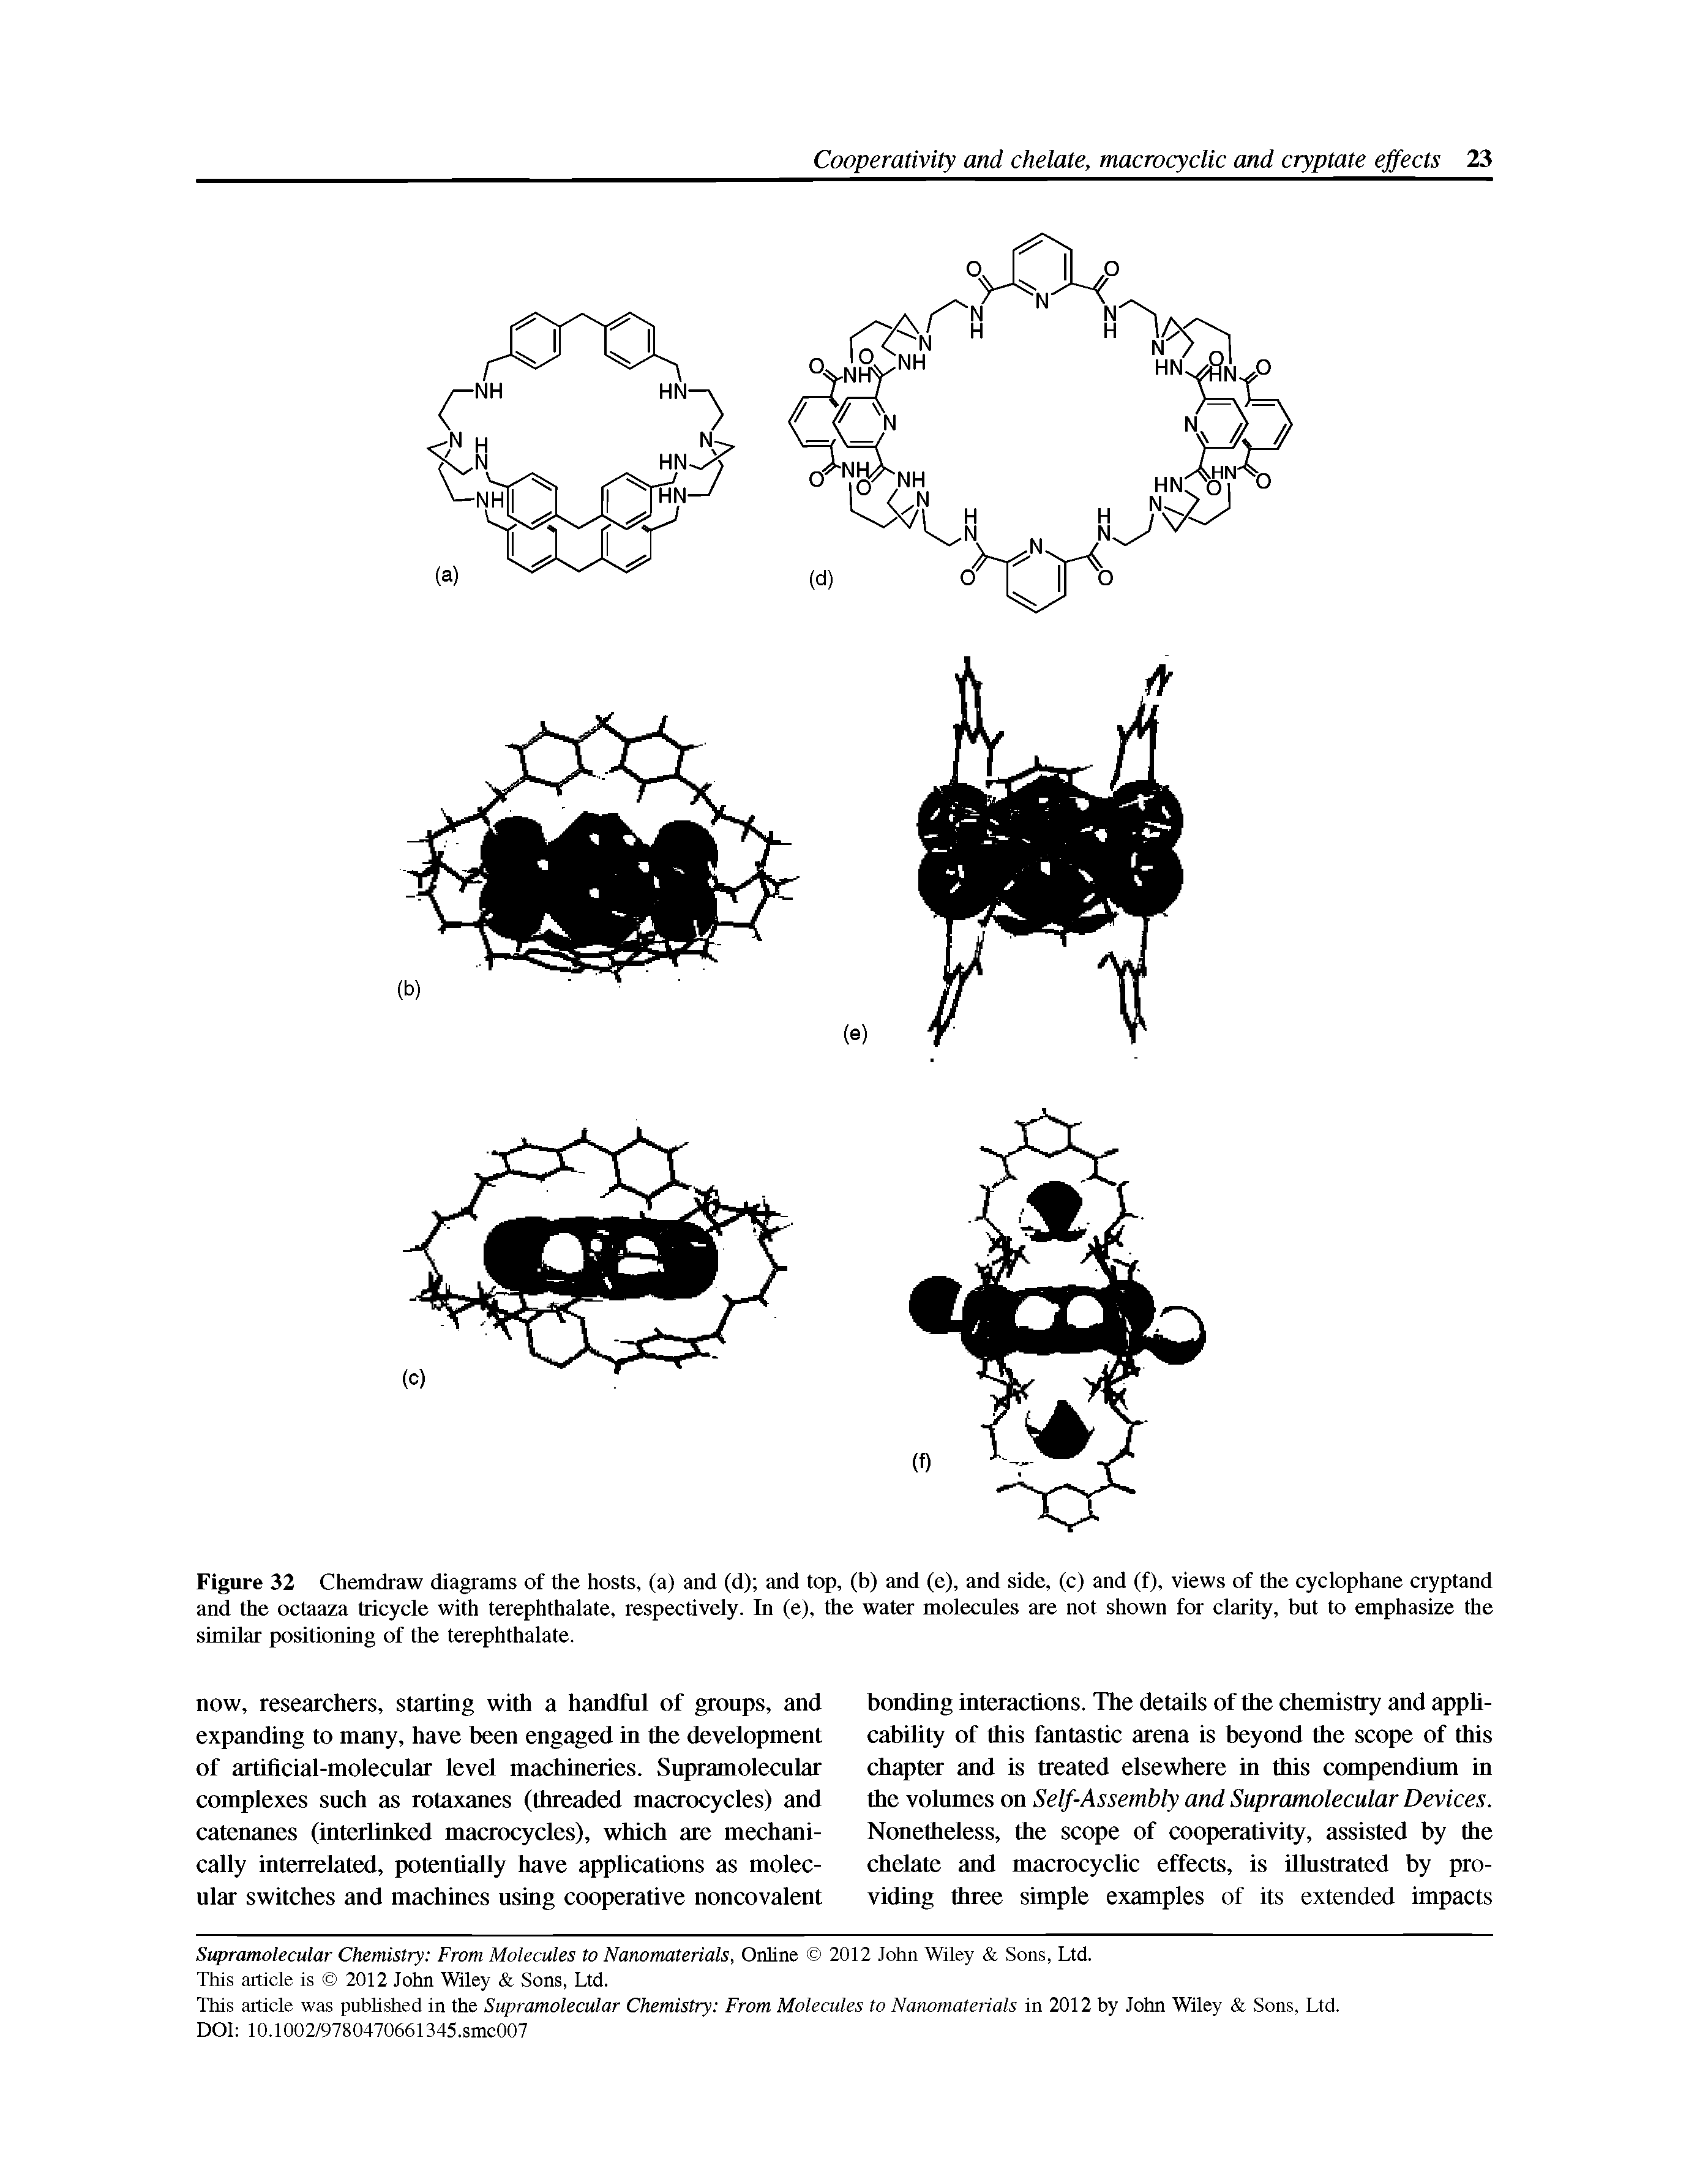 Figure 32 Chemdraw diagrams of the hosts, (a) and (d) and top, (b) and (e), and side, (c) and (f), views of the cyclophane cryptand and the octaaza tricycle with terephthalate, respectively. In (e), the water molecules are not shown for clarity, but to emphasize the similar positioning of the terephthalate.